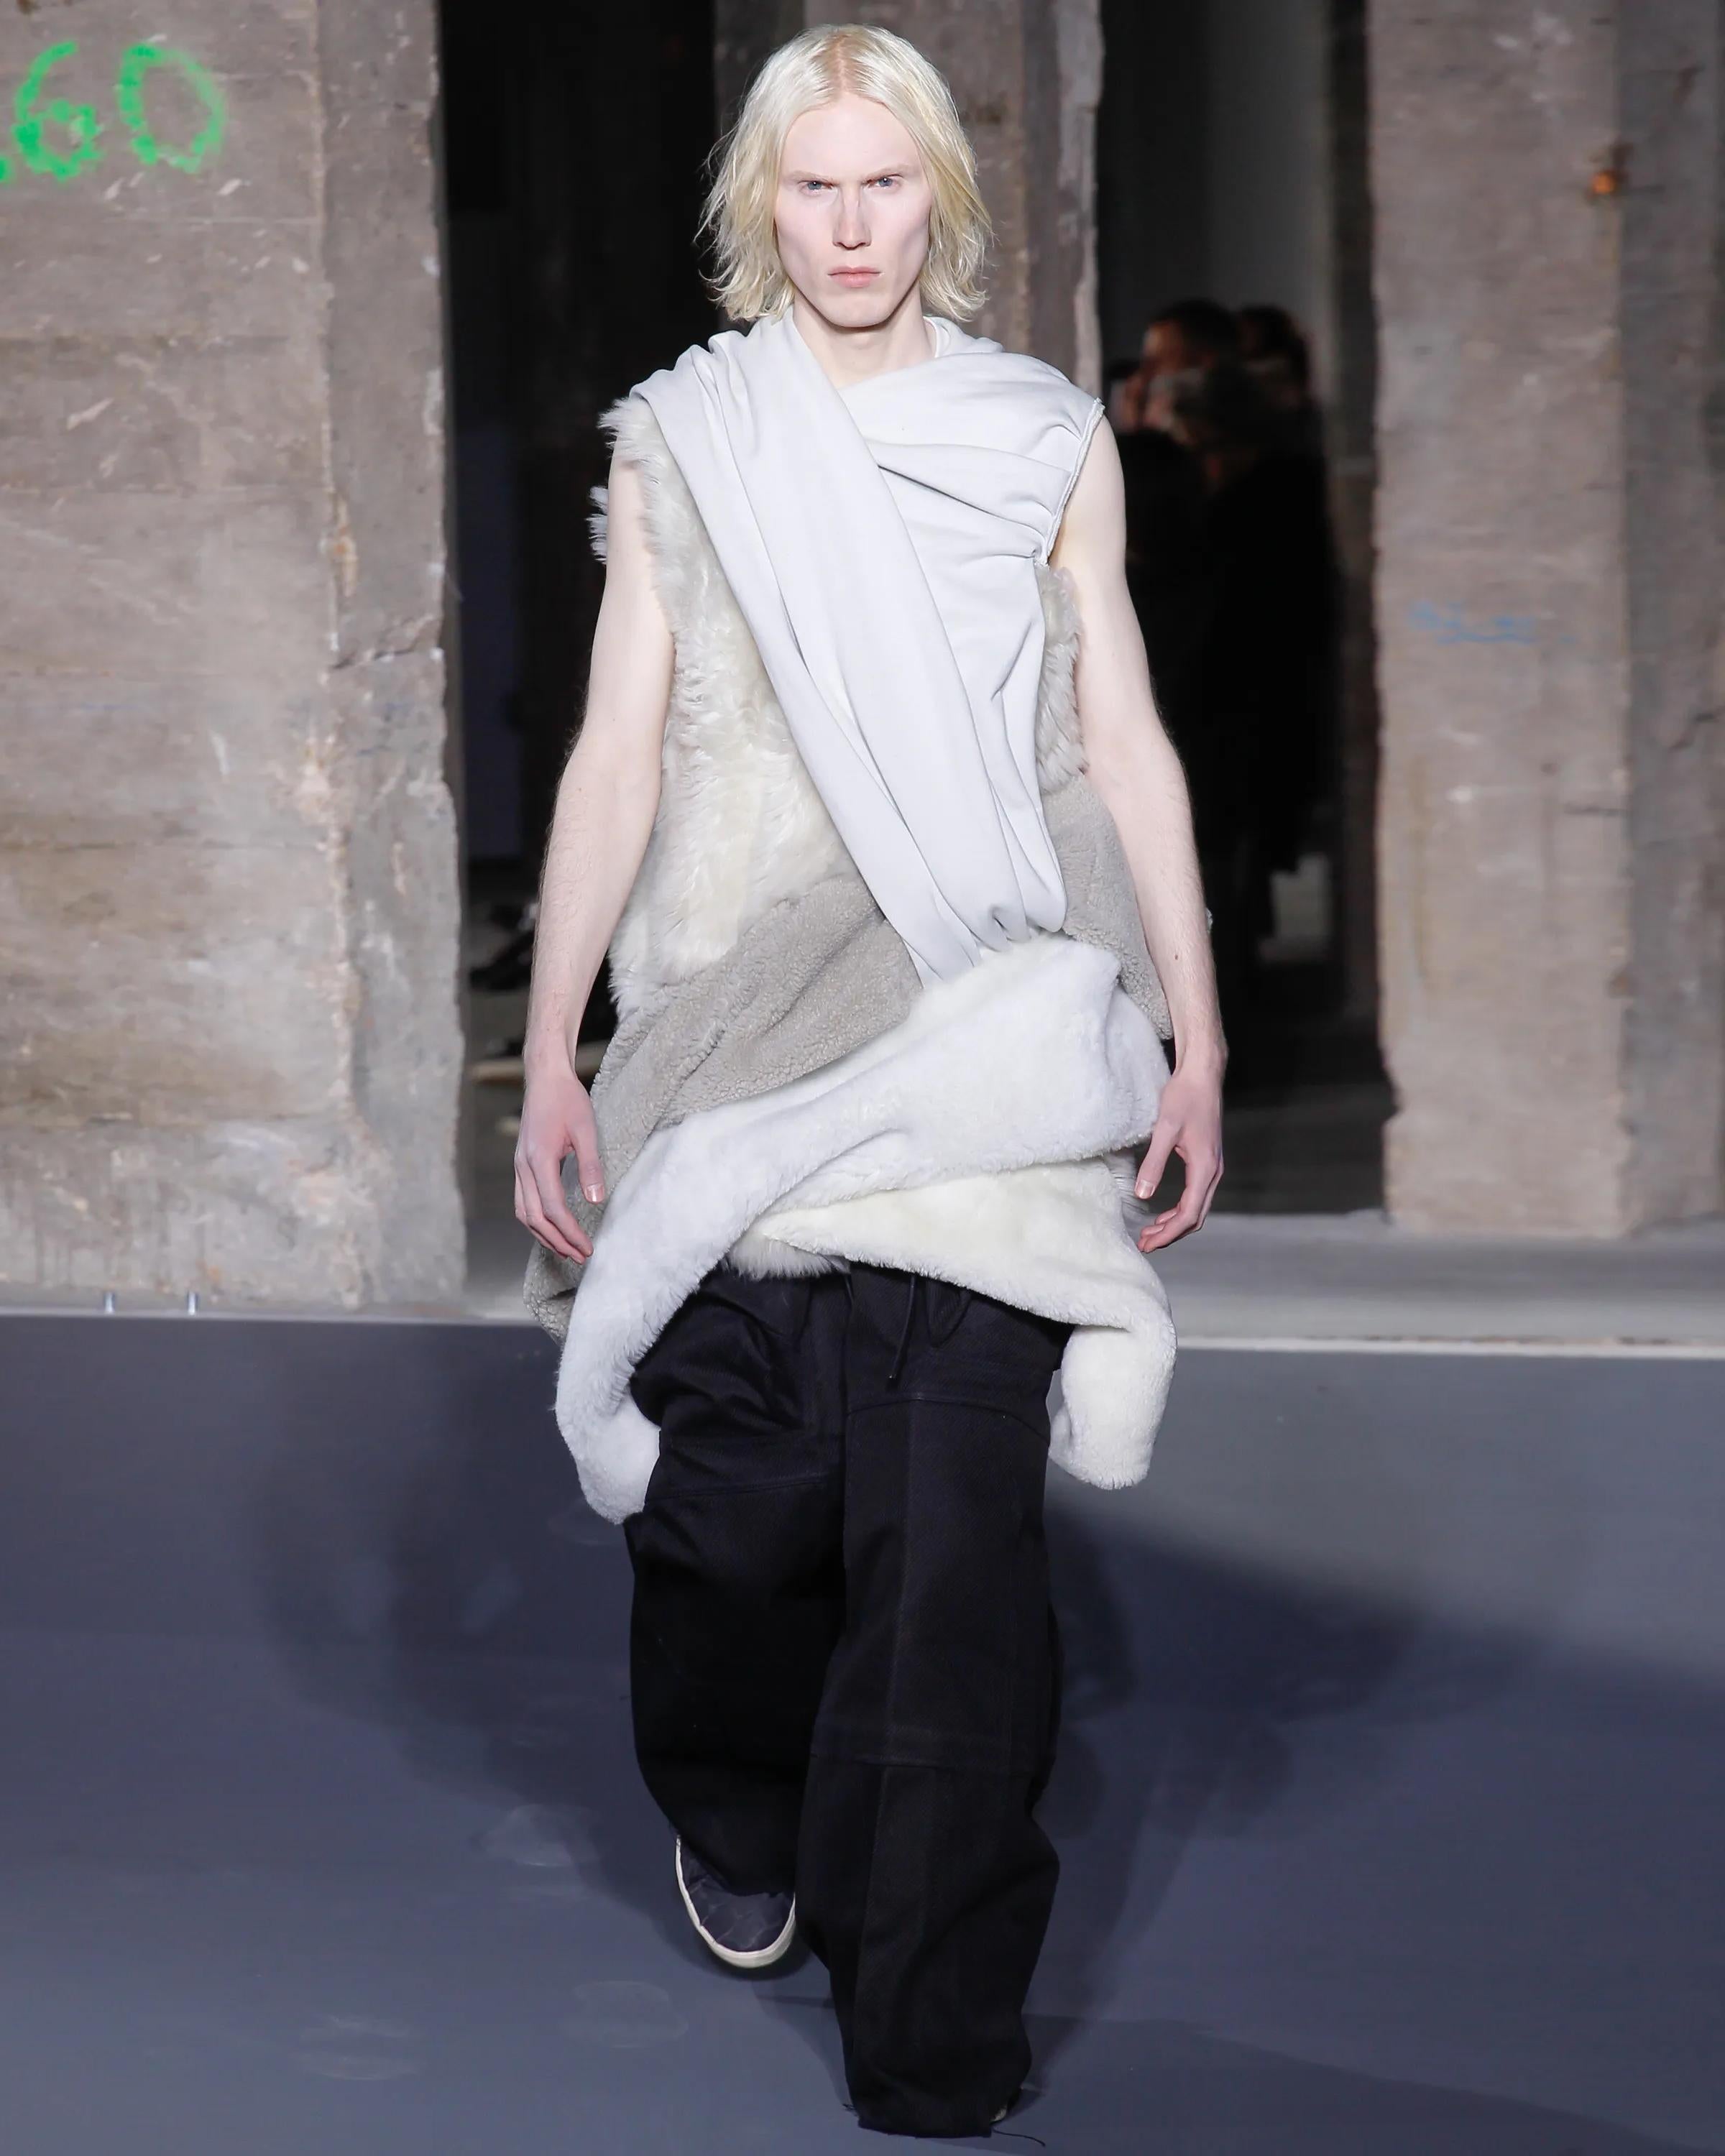 Rick Owens Unisex Draped Shearling 'Mastodon' Dress, fw 2016 In Good Condition For Sale In London, GB